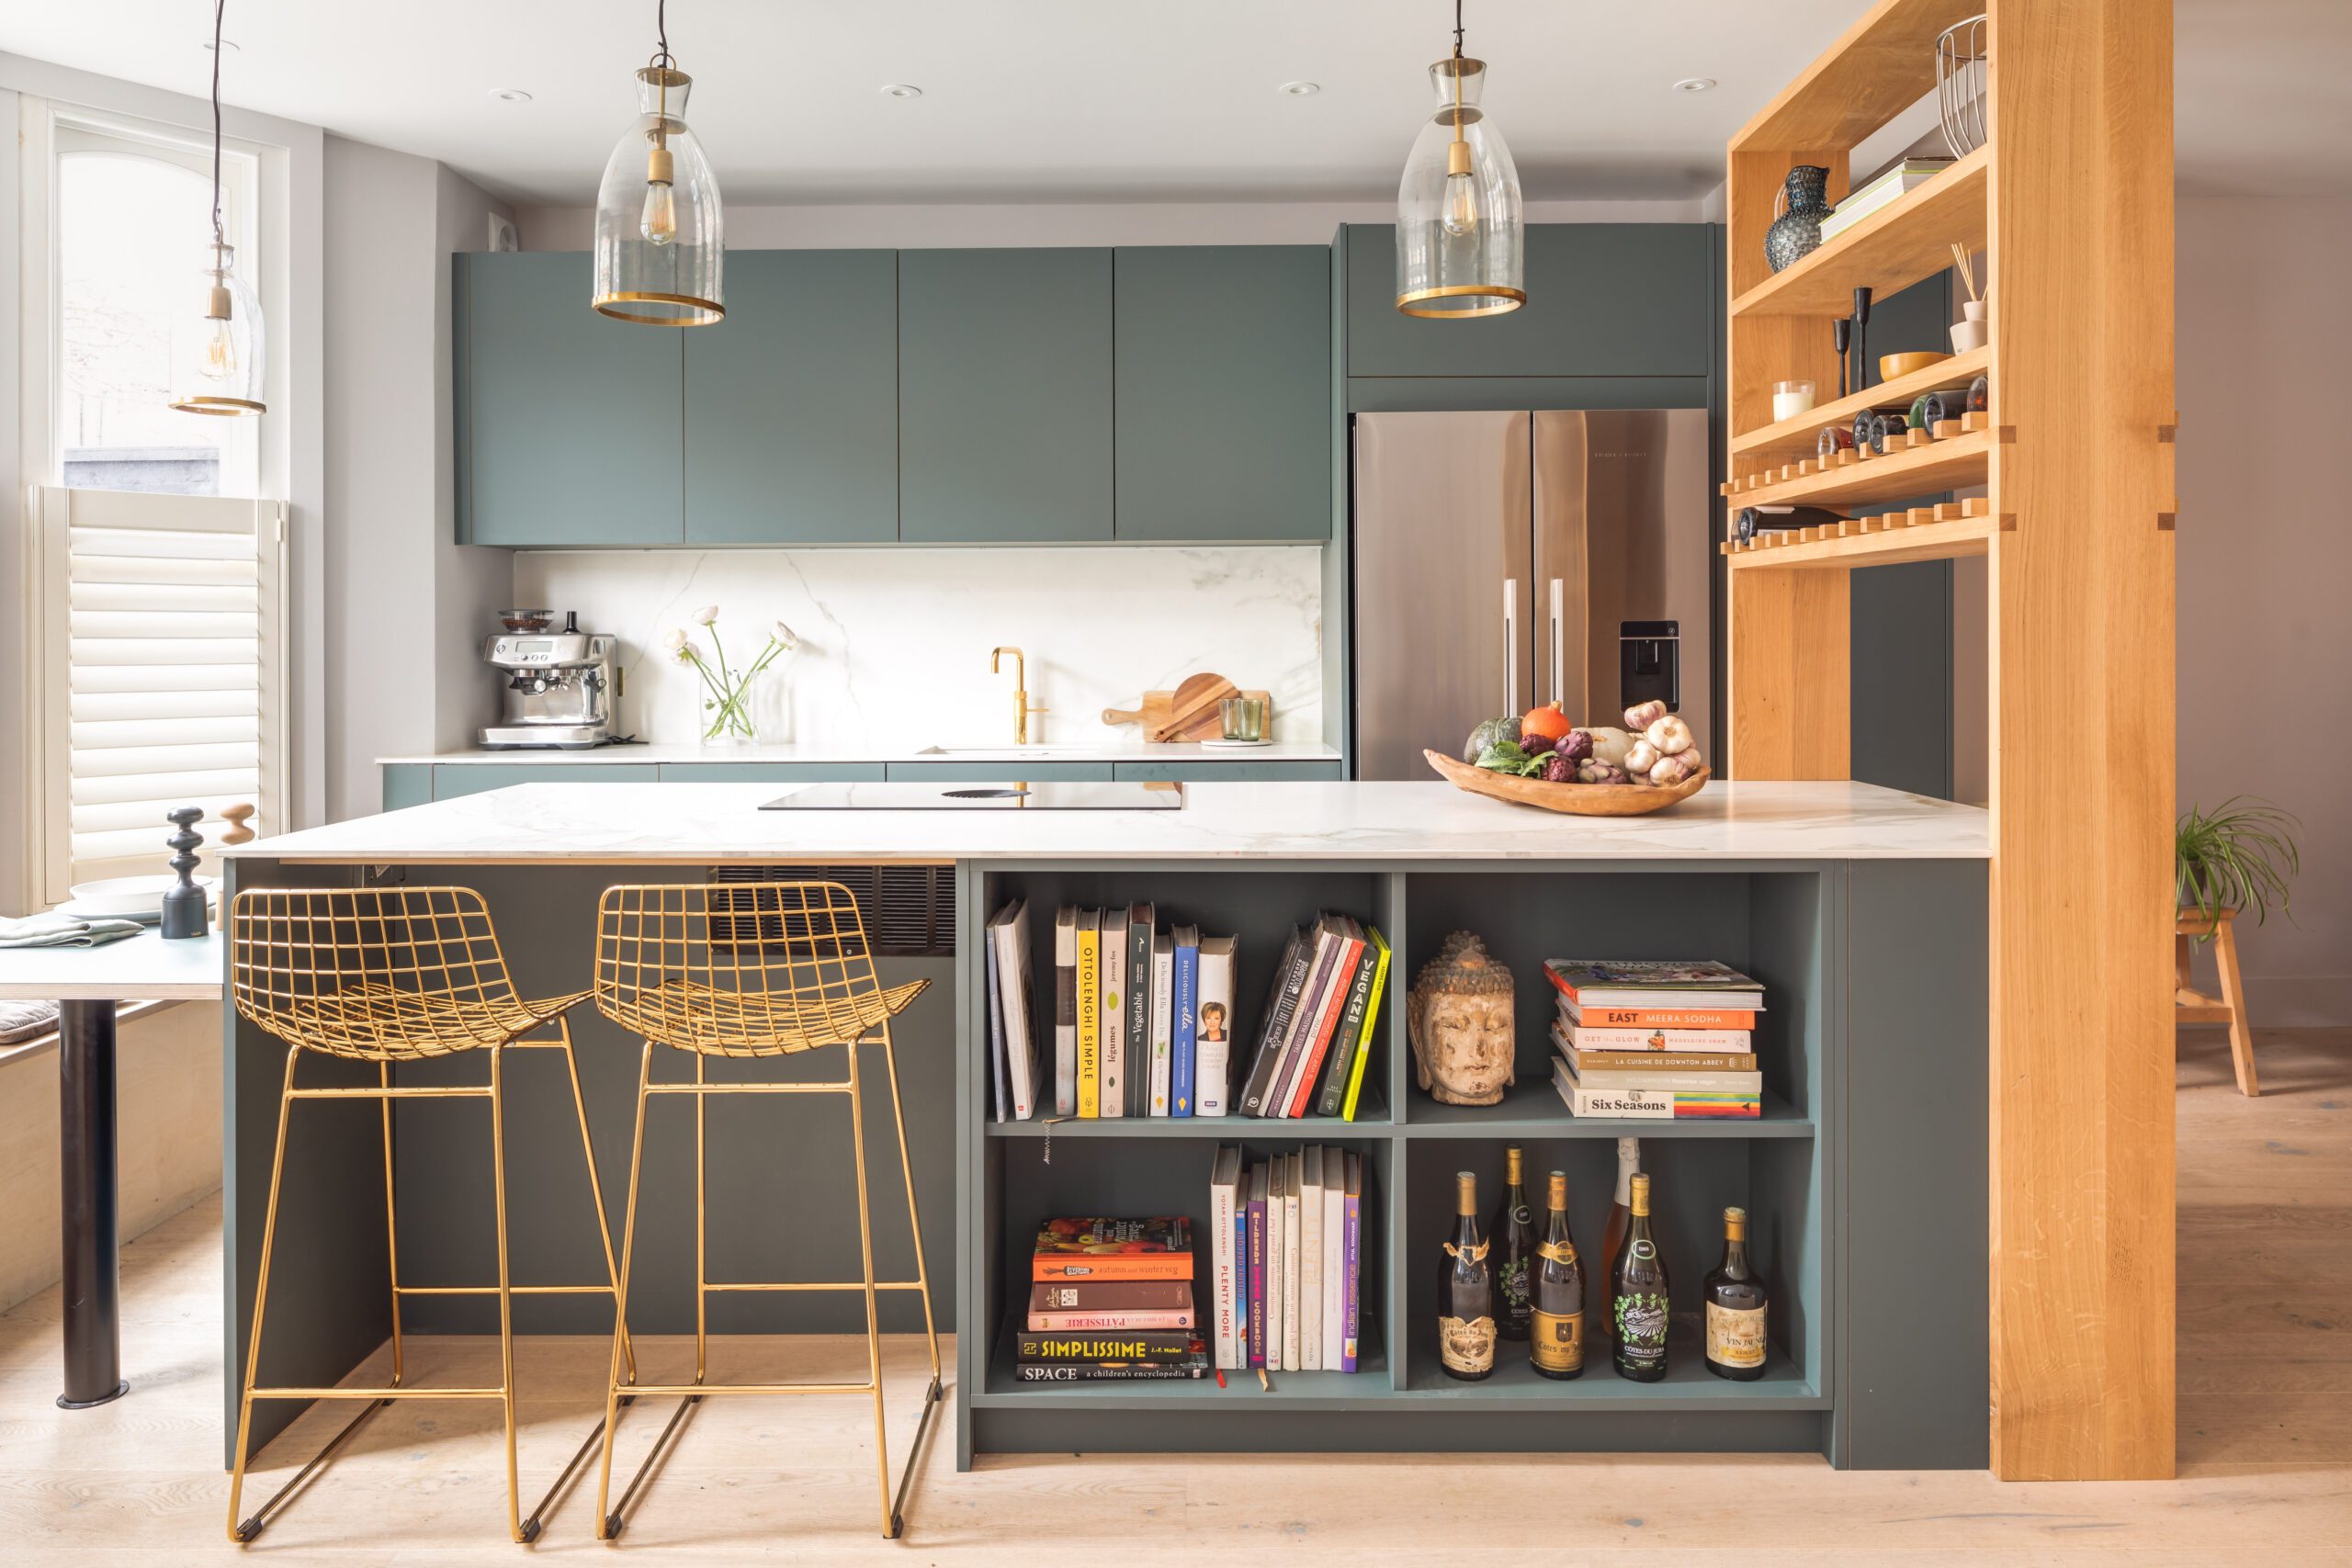 Made By HUSK's East Dulwich Kitchen case study featuring kitchen fronts in Fenix Verde Comodoro.